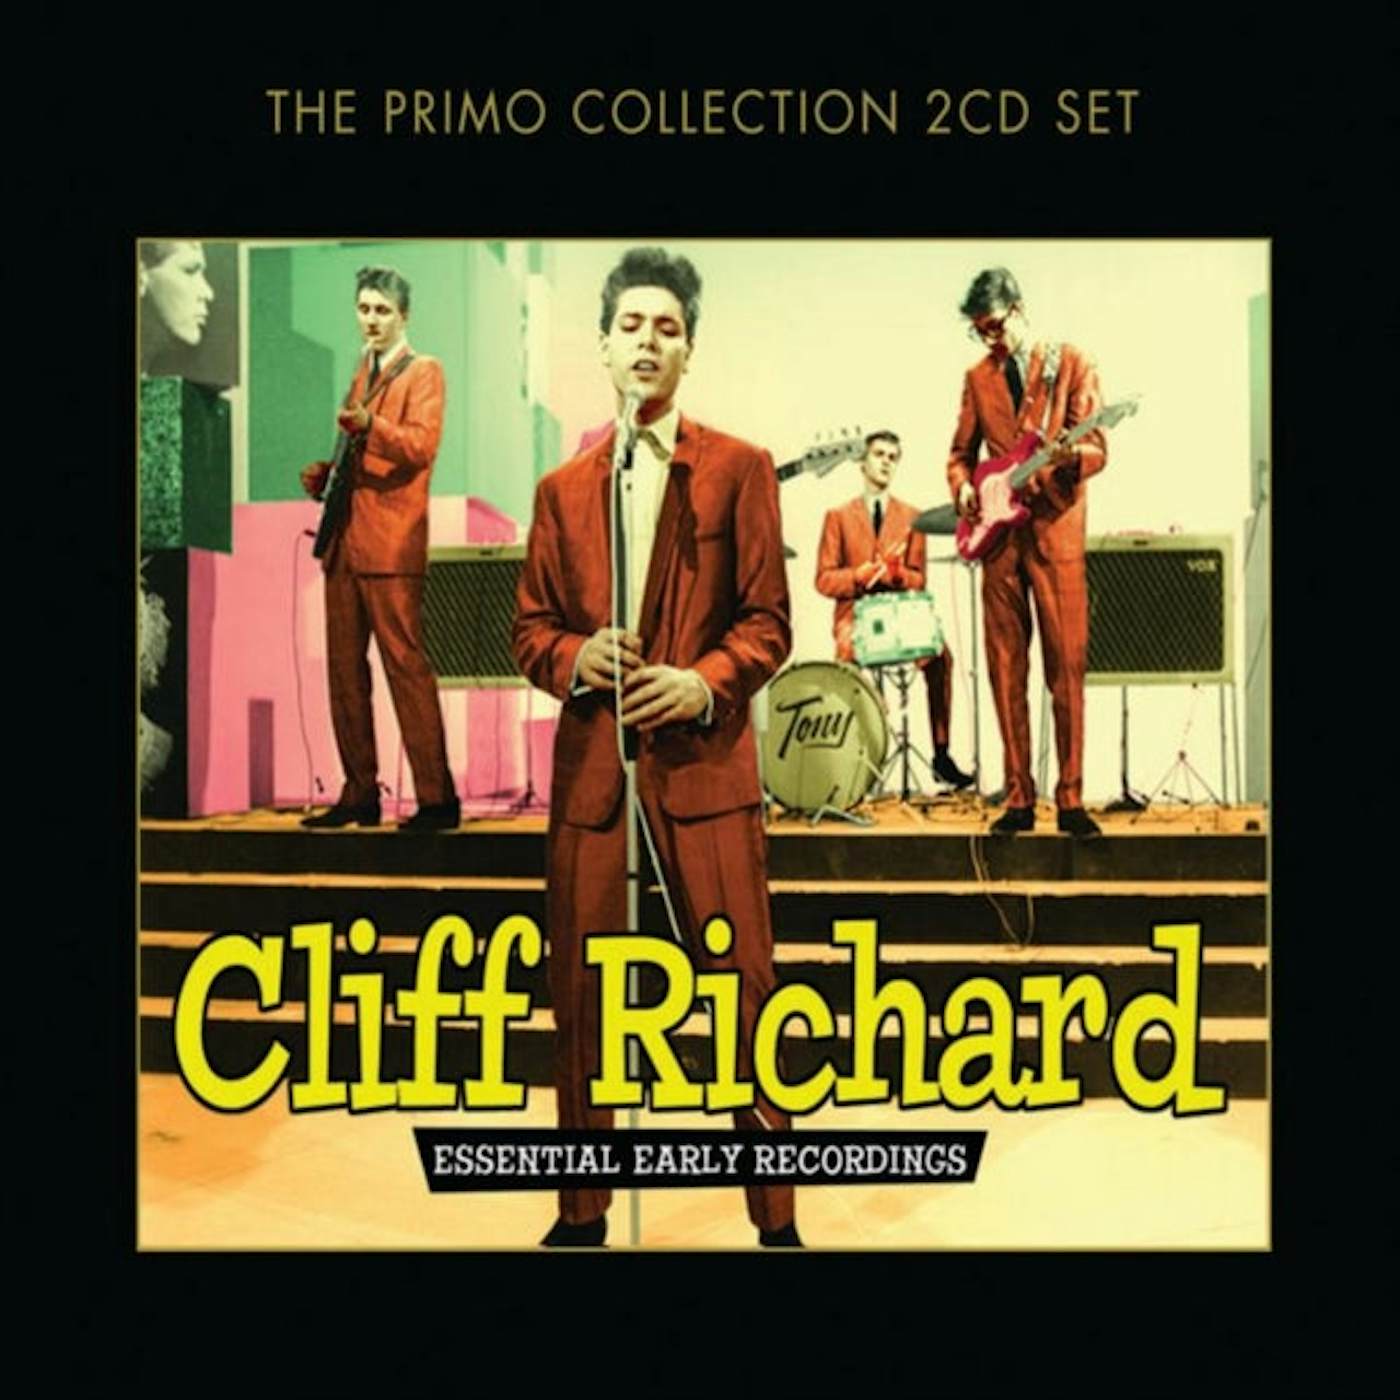 Cliff Richard CD - Essential Early Recording